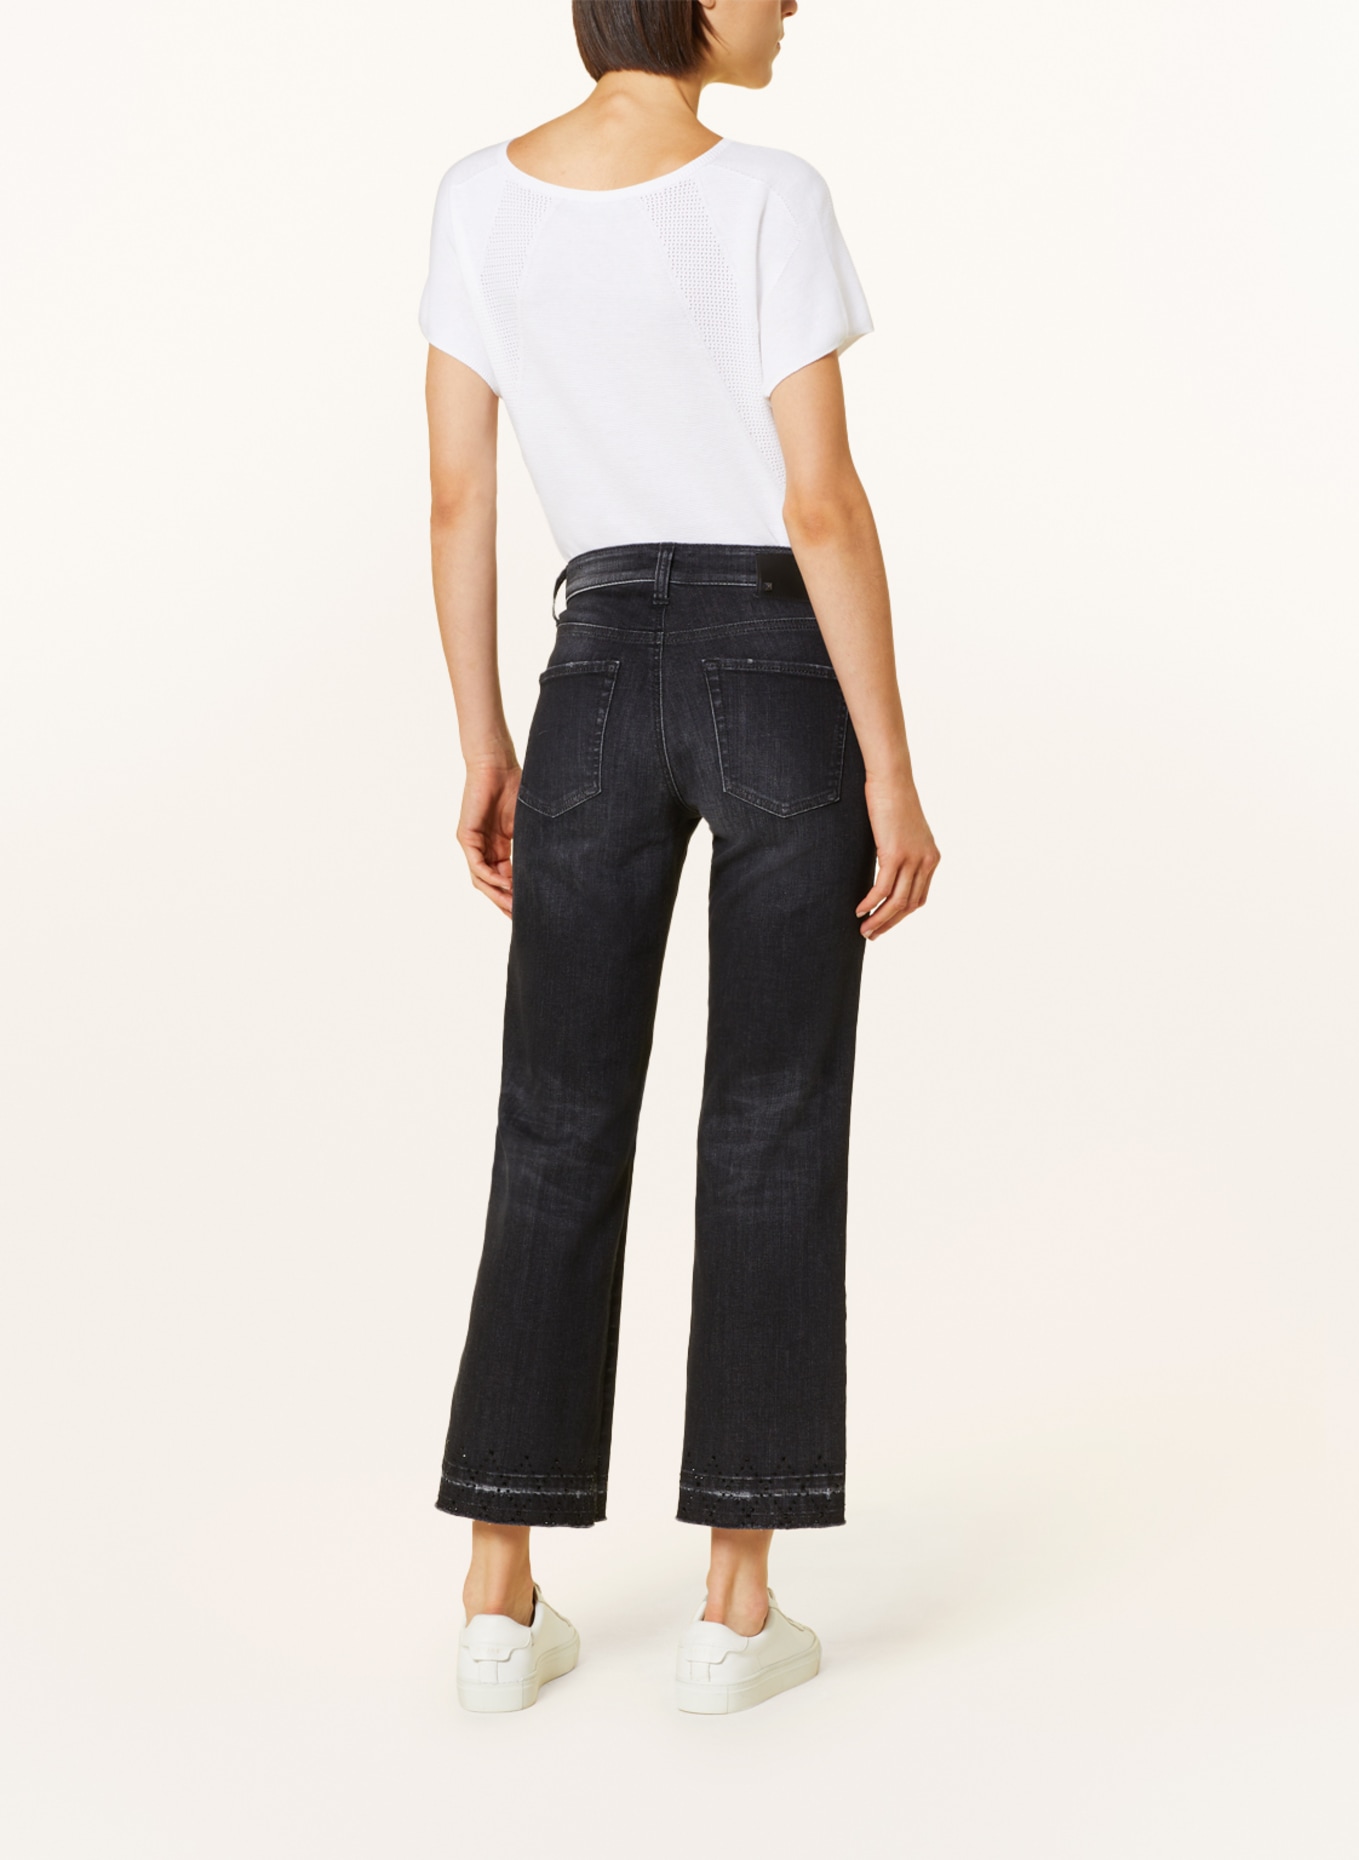 CAMBIO Bootcut jeans FRANCESCA with decorative gems, Color: 5227 contrast used open hem (Image 3)